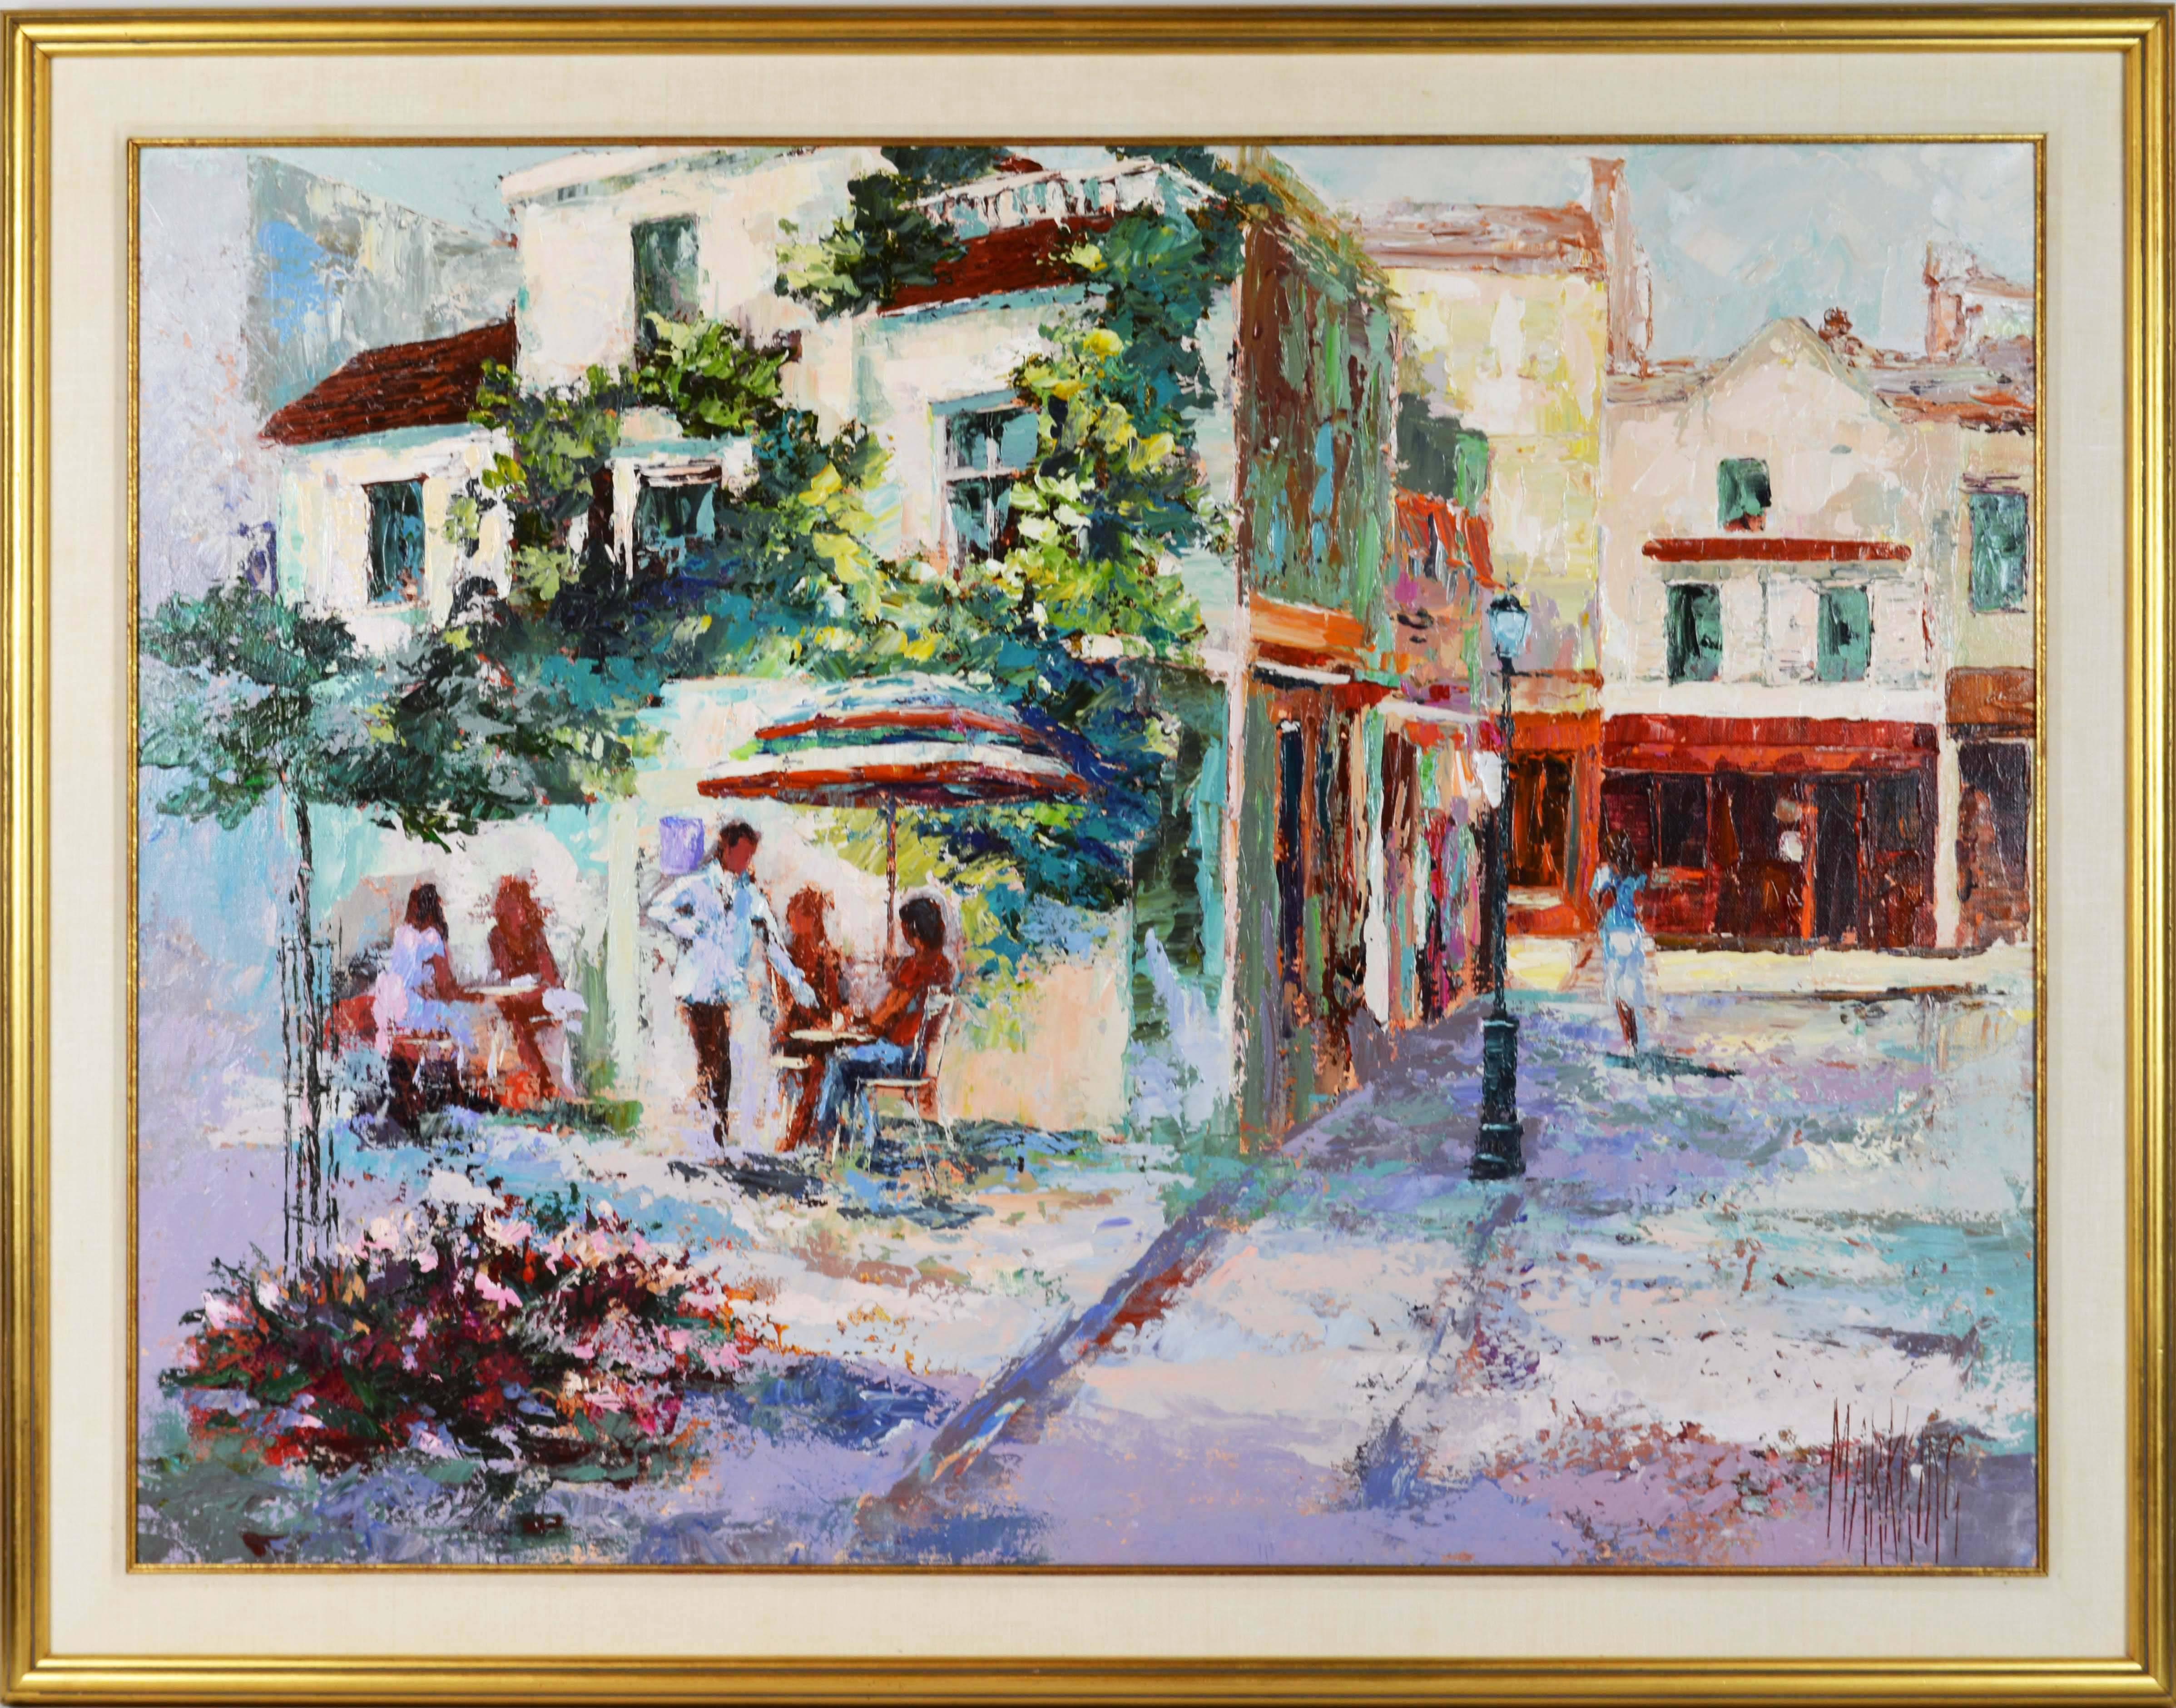 

'The French Village Cafe'
by Mark King, American (born in India, 1931-2014)
Measures: 34 x 48 in without frame, 42 x 54 in including frame, oil on canvas, signed.
Housed in a giltwood gallery frame.

Mark King:

Mark King, a champion of